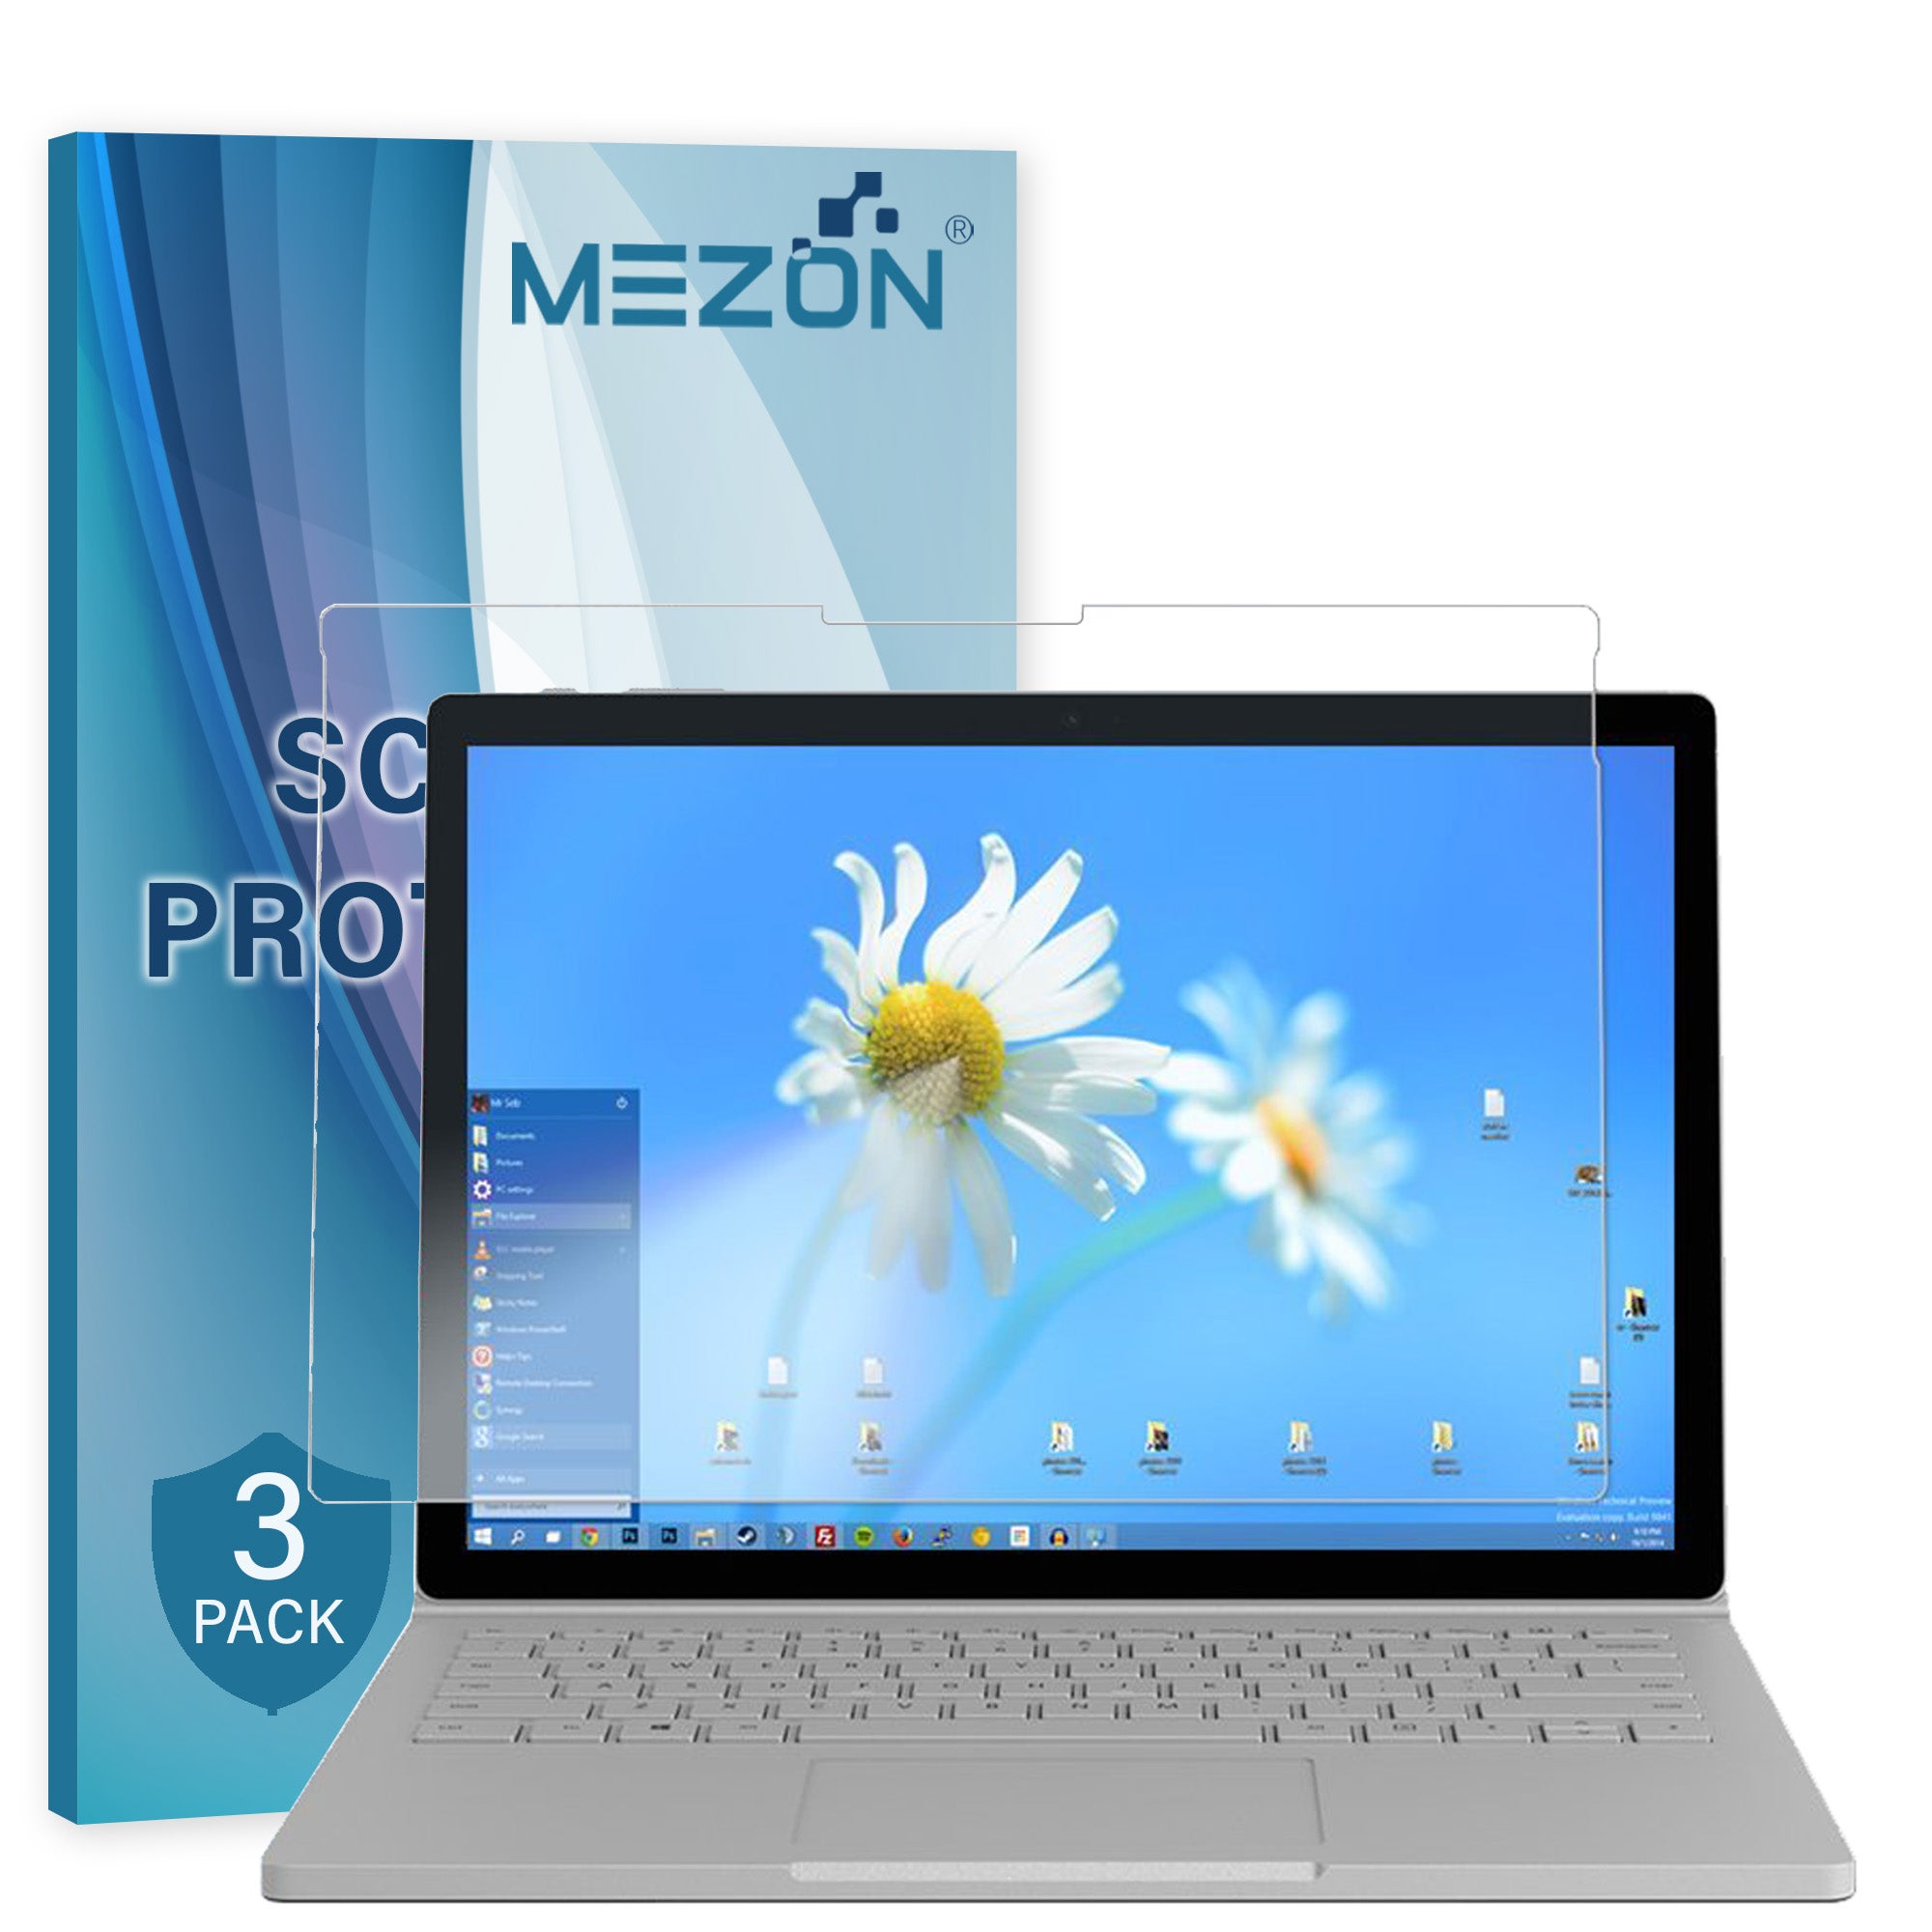 [3 Pack] Microsoft Surface Book 3 (13.5") Anti-Glare Matte Film Screen Protector by MEZON – Case and Surface Pen Friendly, Shock Absorption – FREE EXPRESS